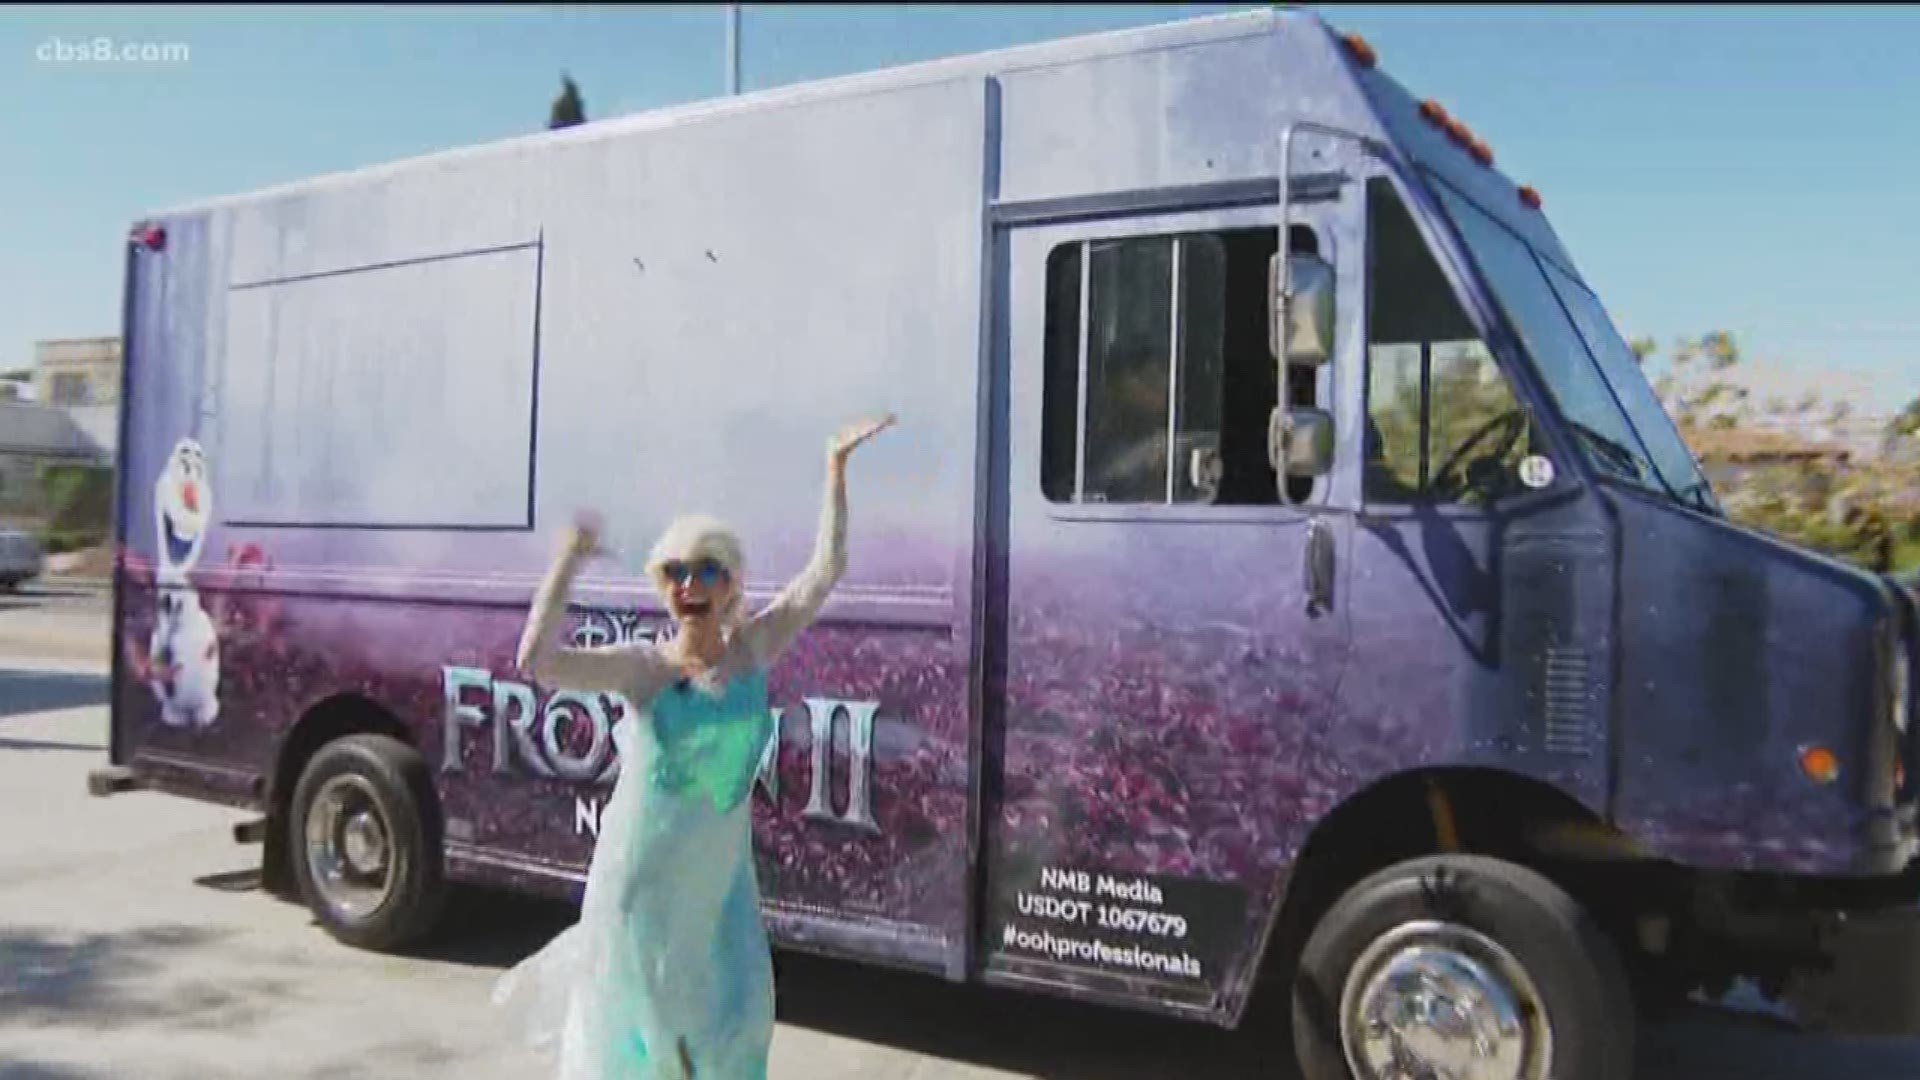 The Frozen 2 Tour features a film-themed truck with some giveaways to share with moviegoers.